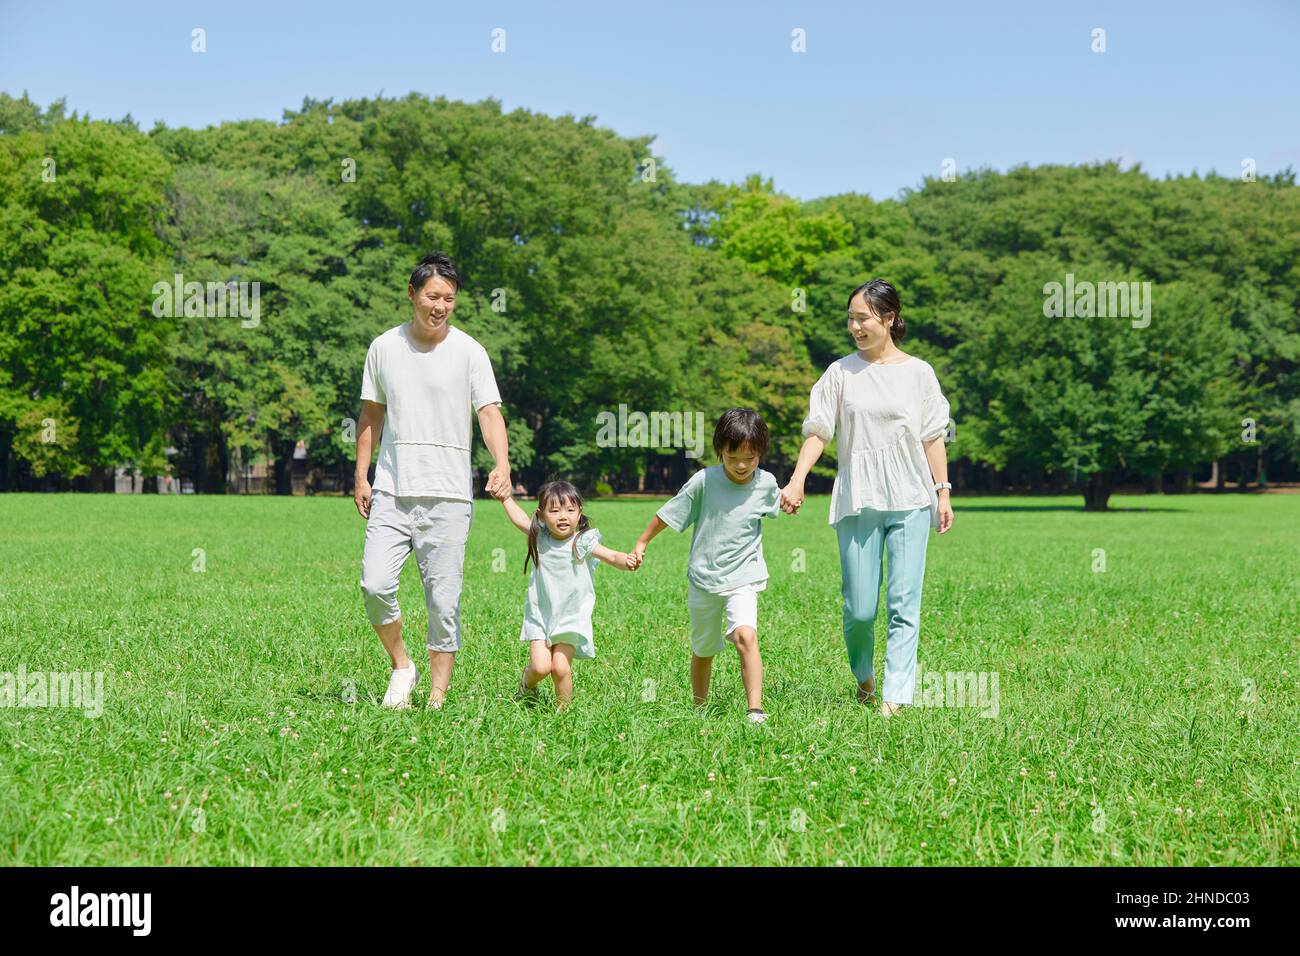 Japanese Parent And Child Holding Hands Stock Photo